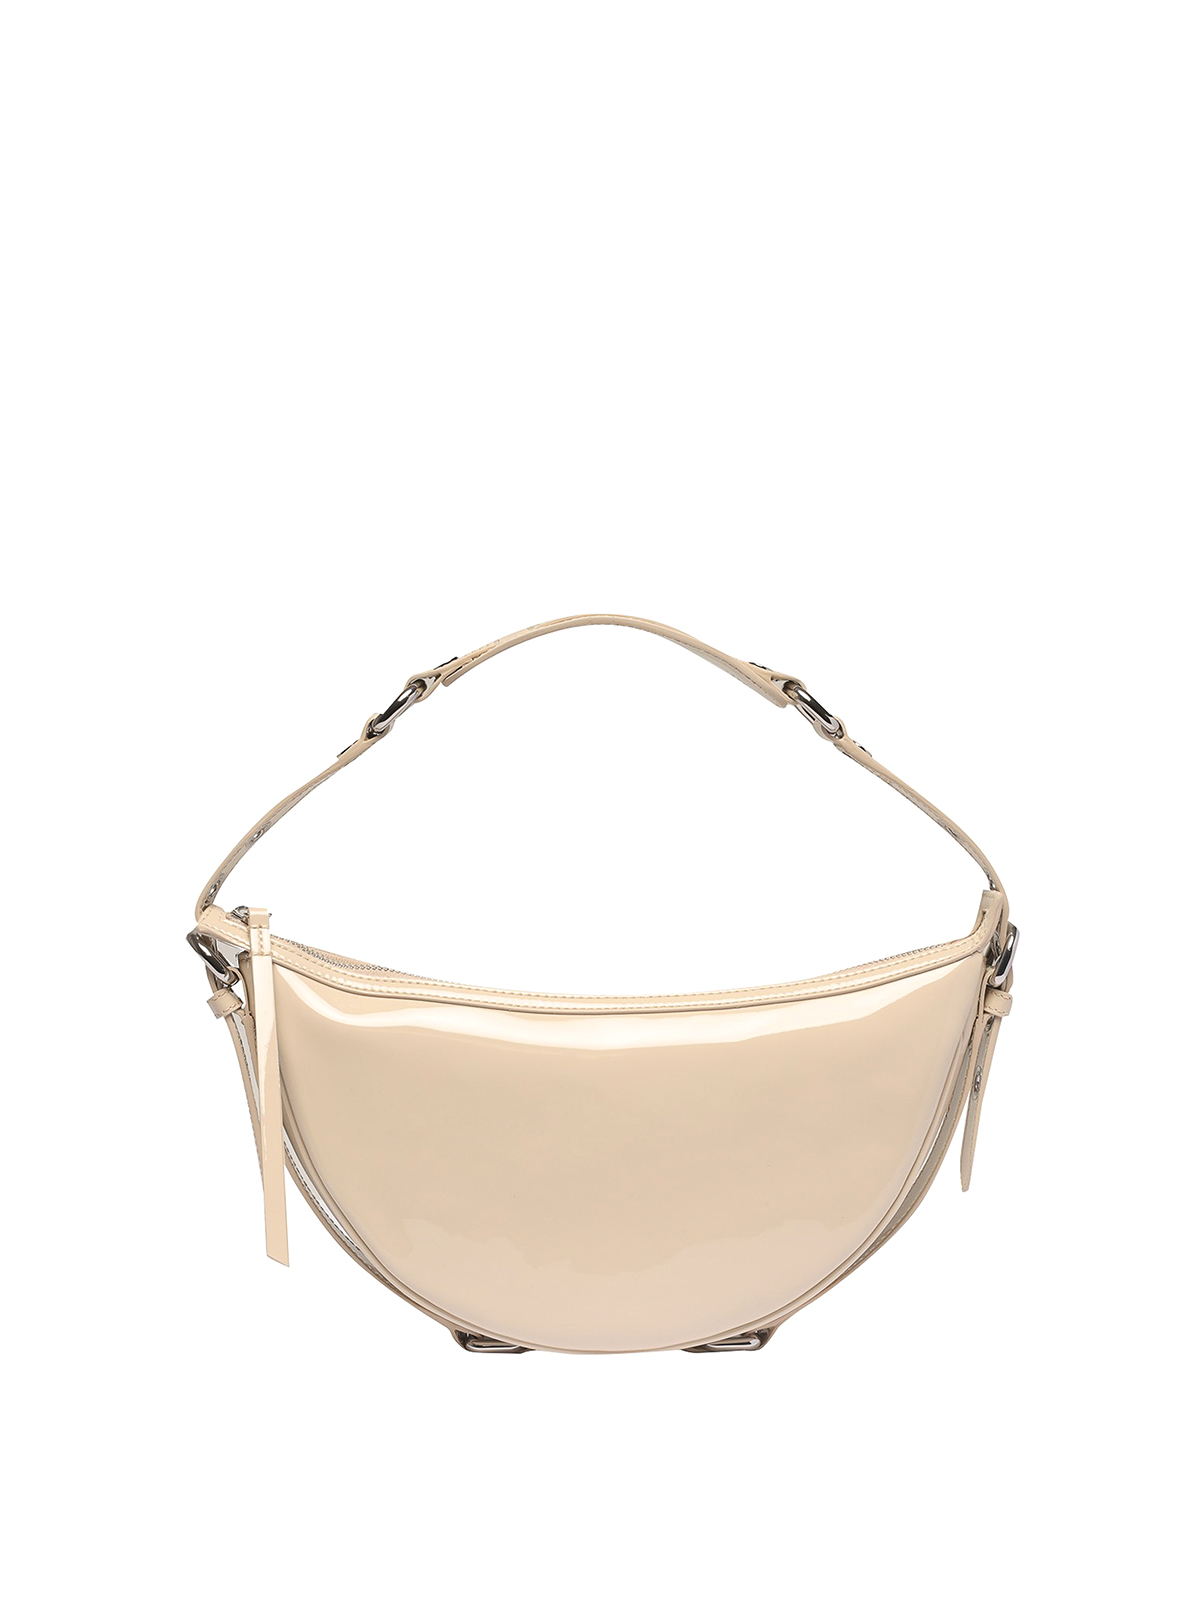 By Far Gib Patent Leather Shoulder Bag In Beige